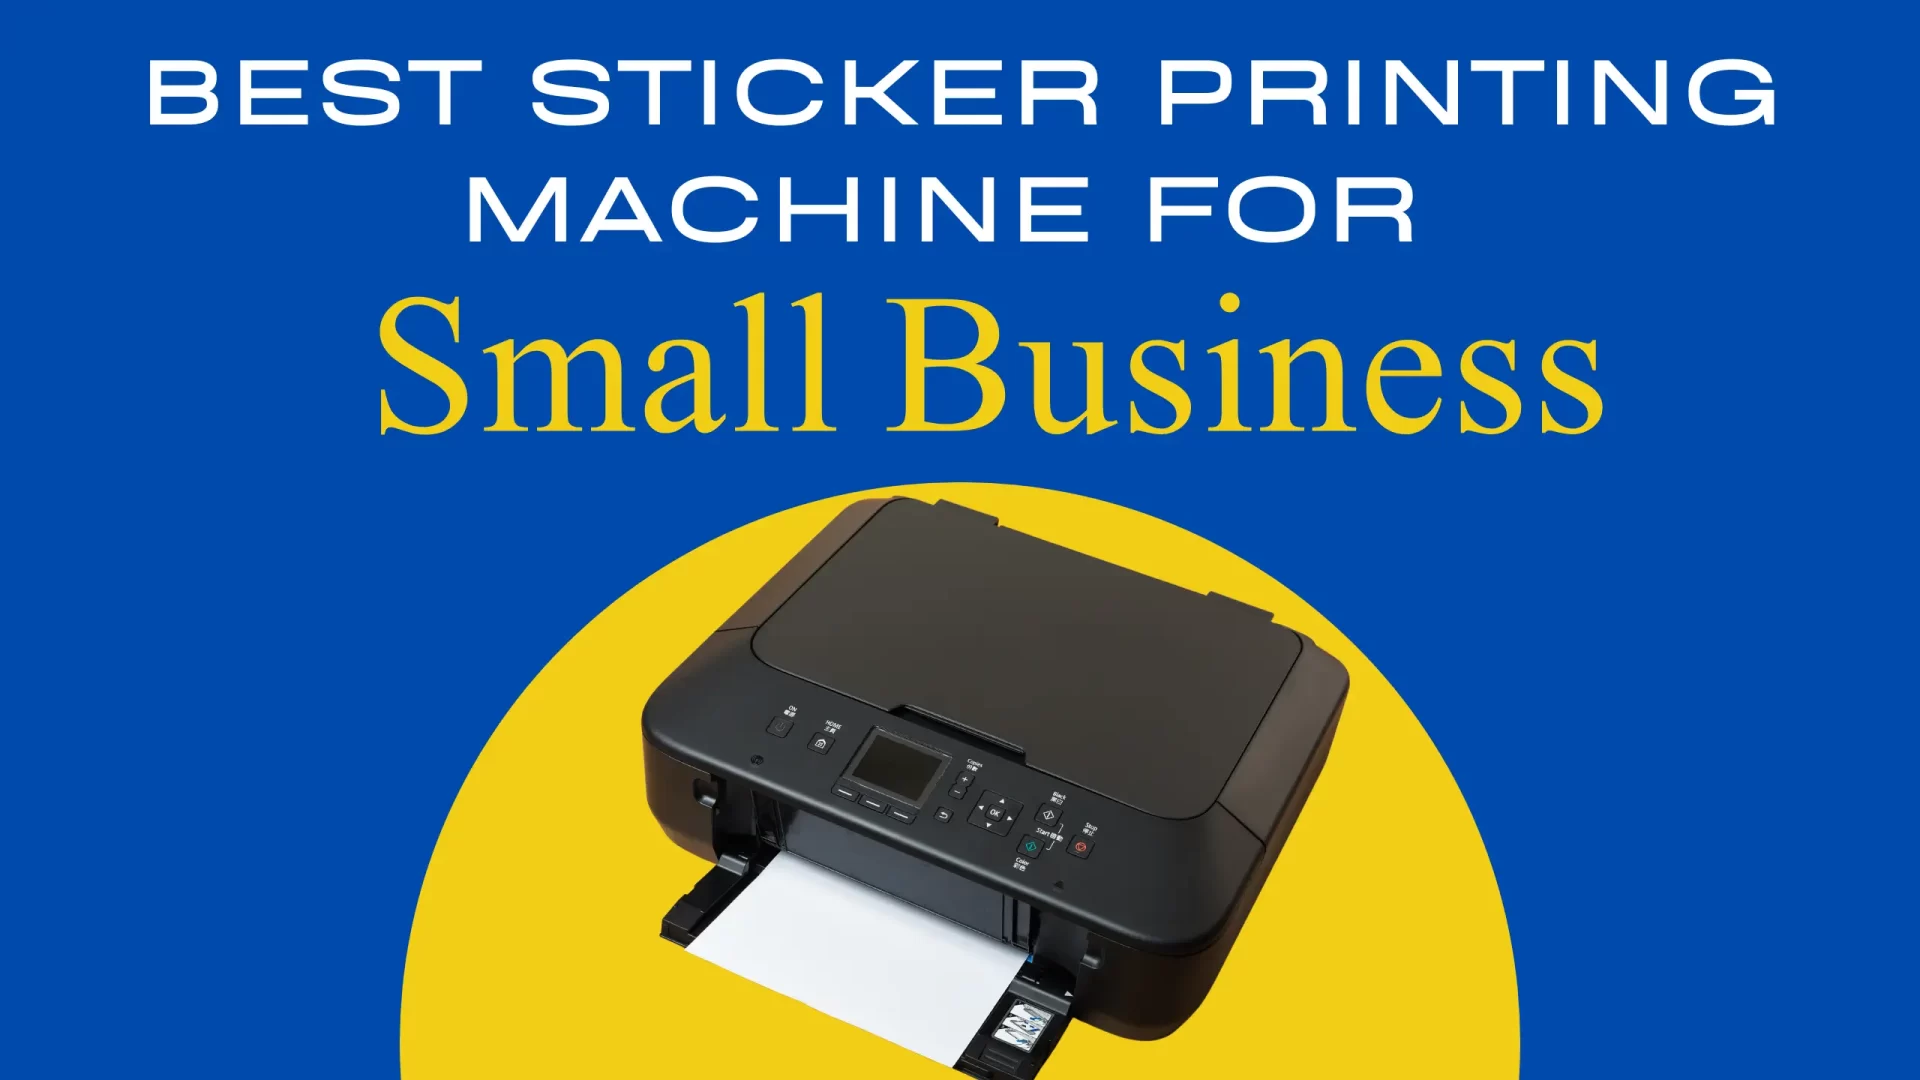 sticker printing machine for small business